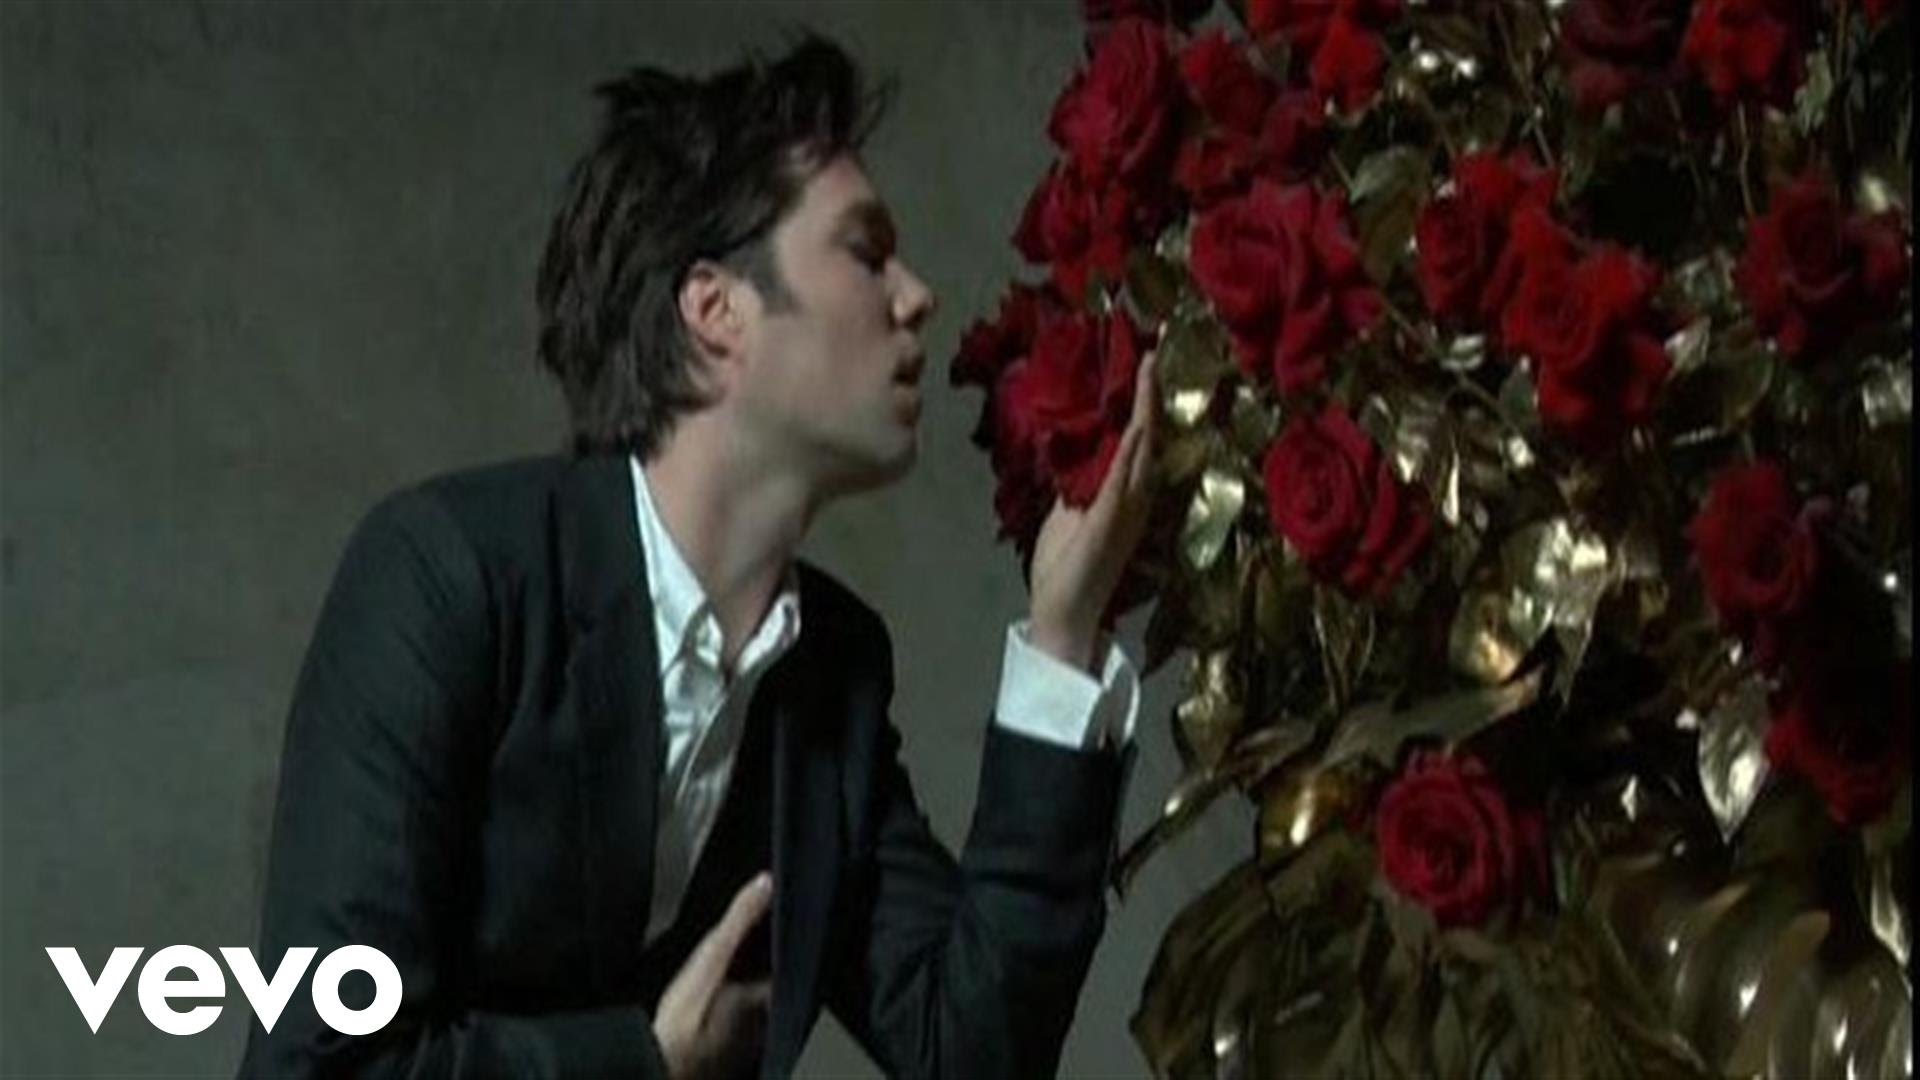 Rufus Wainwright - Going To A Town - YouTube